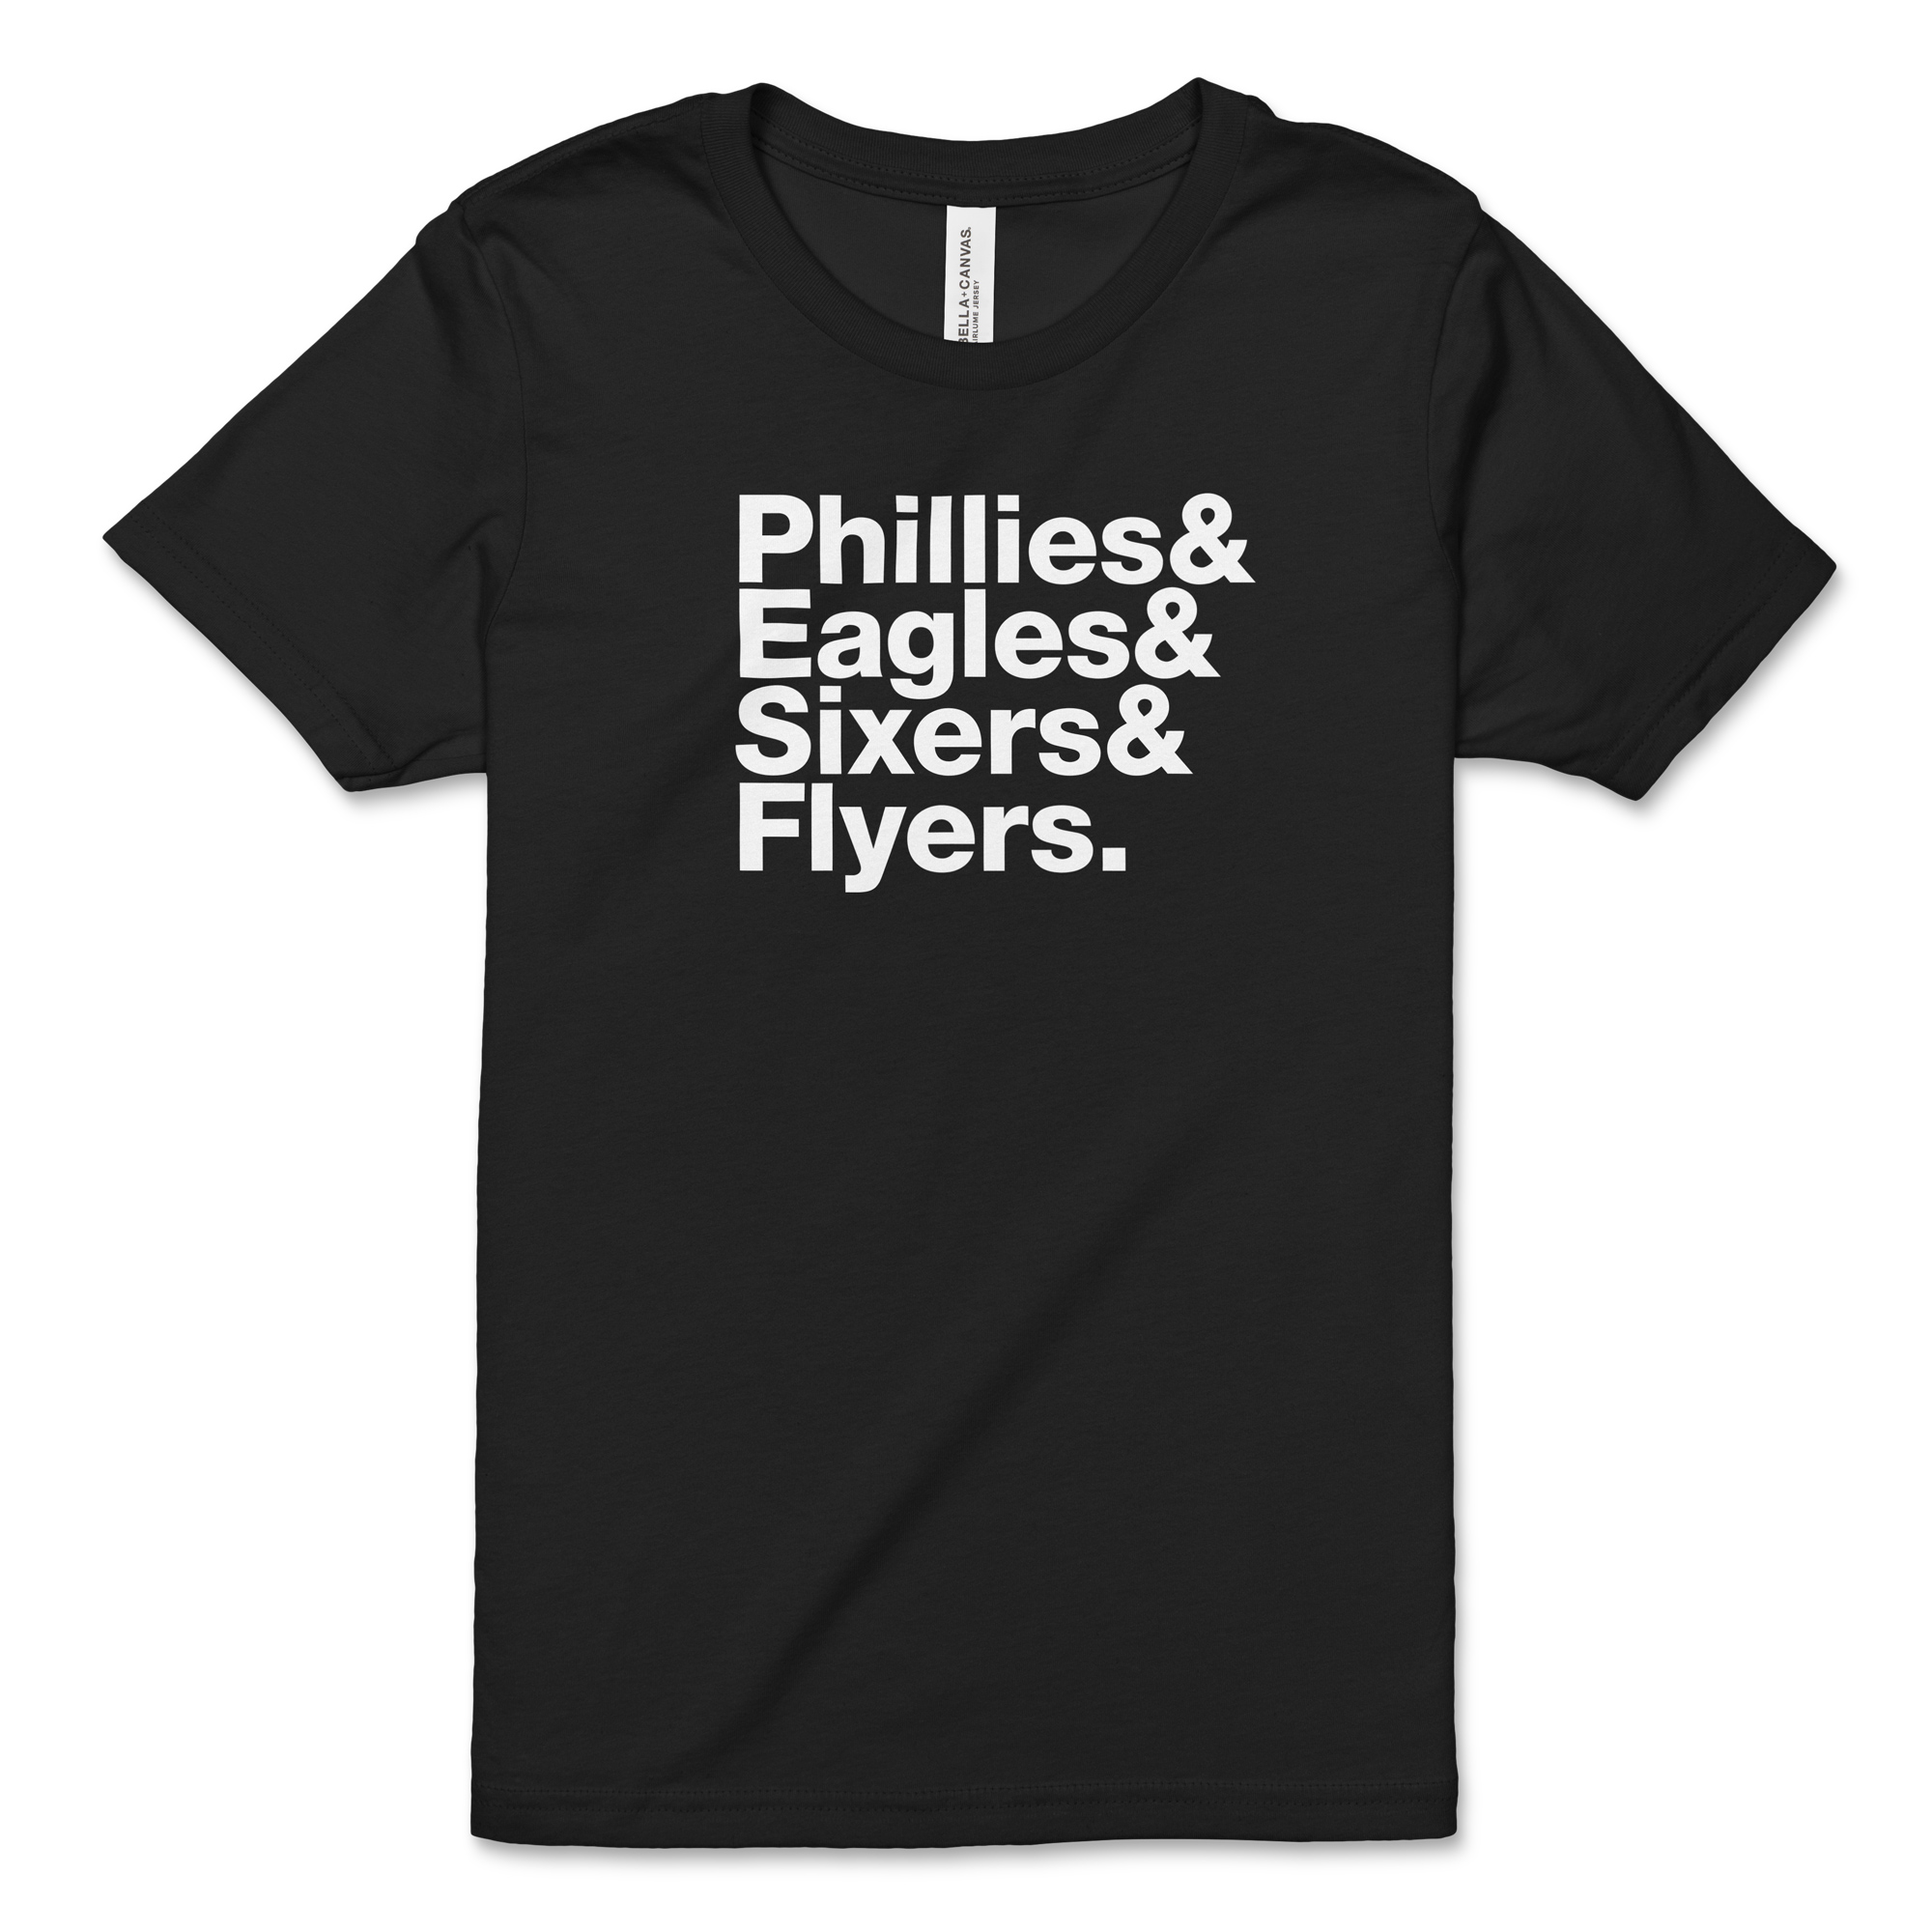 Philadelphia Sports Teams Phillies Eagles 76ers Flyers t-shirt by To-Tee  Clothing - Issuu